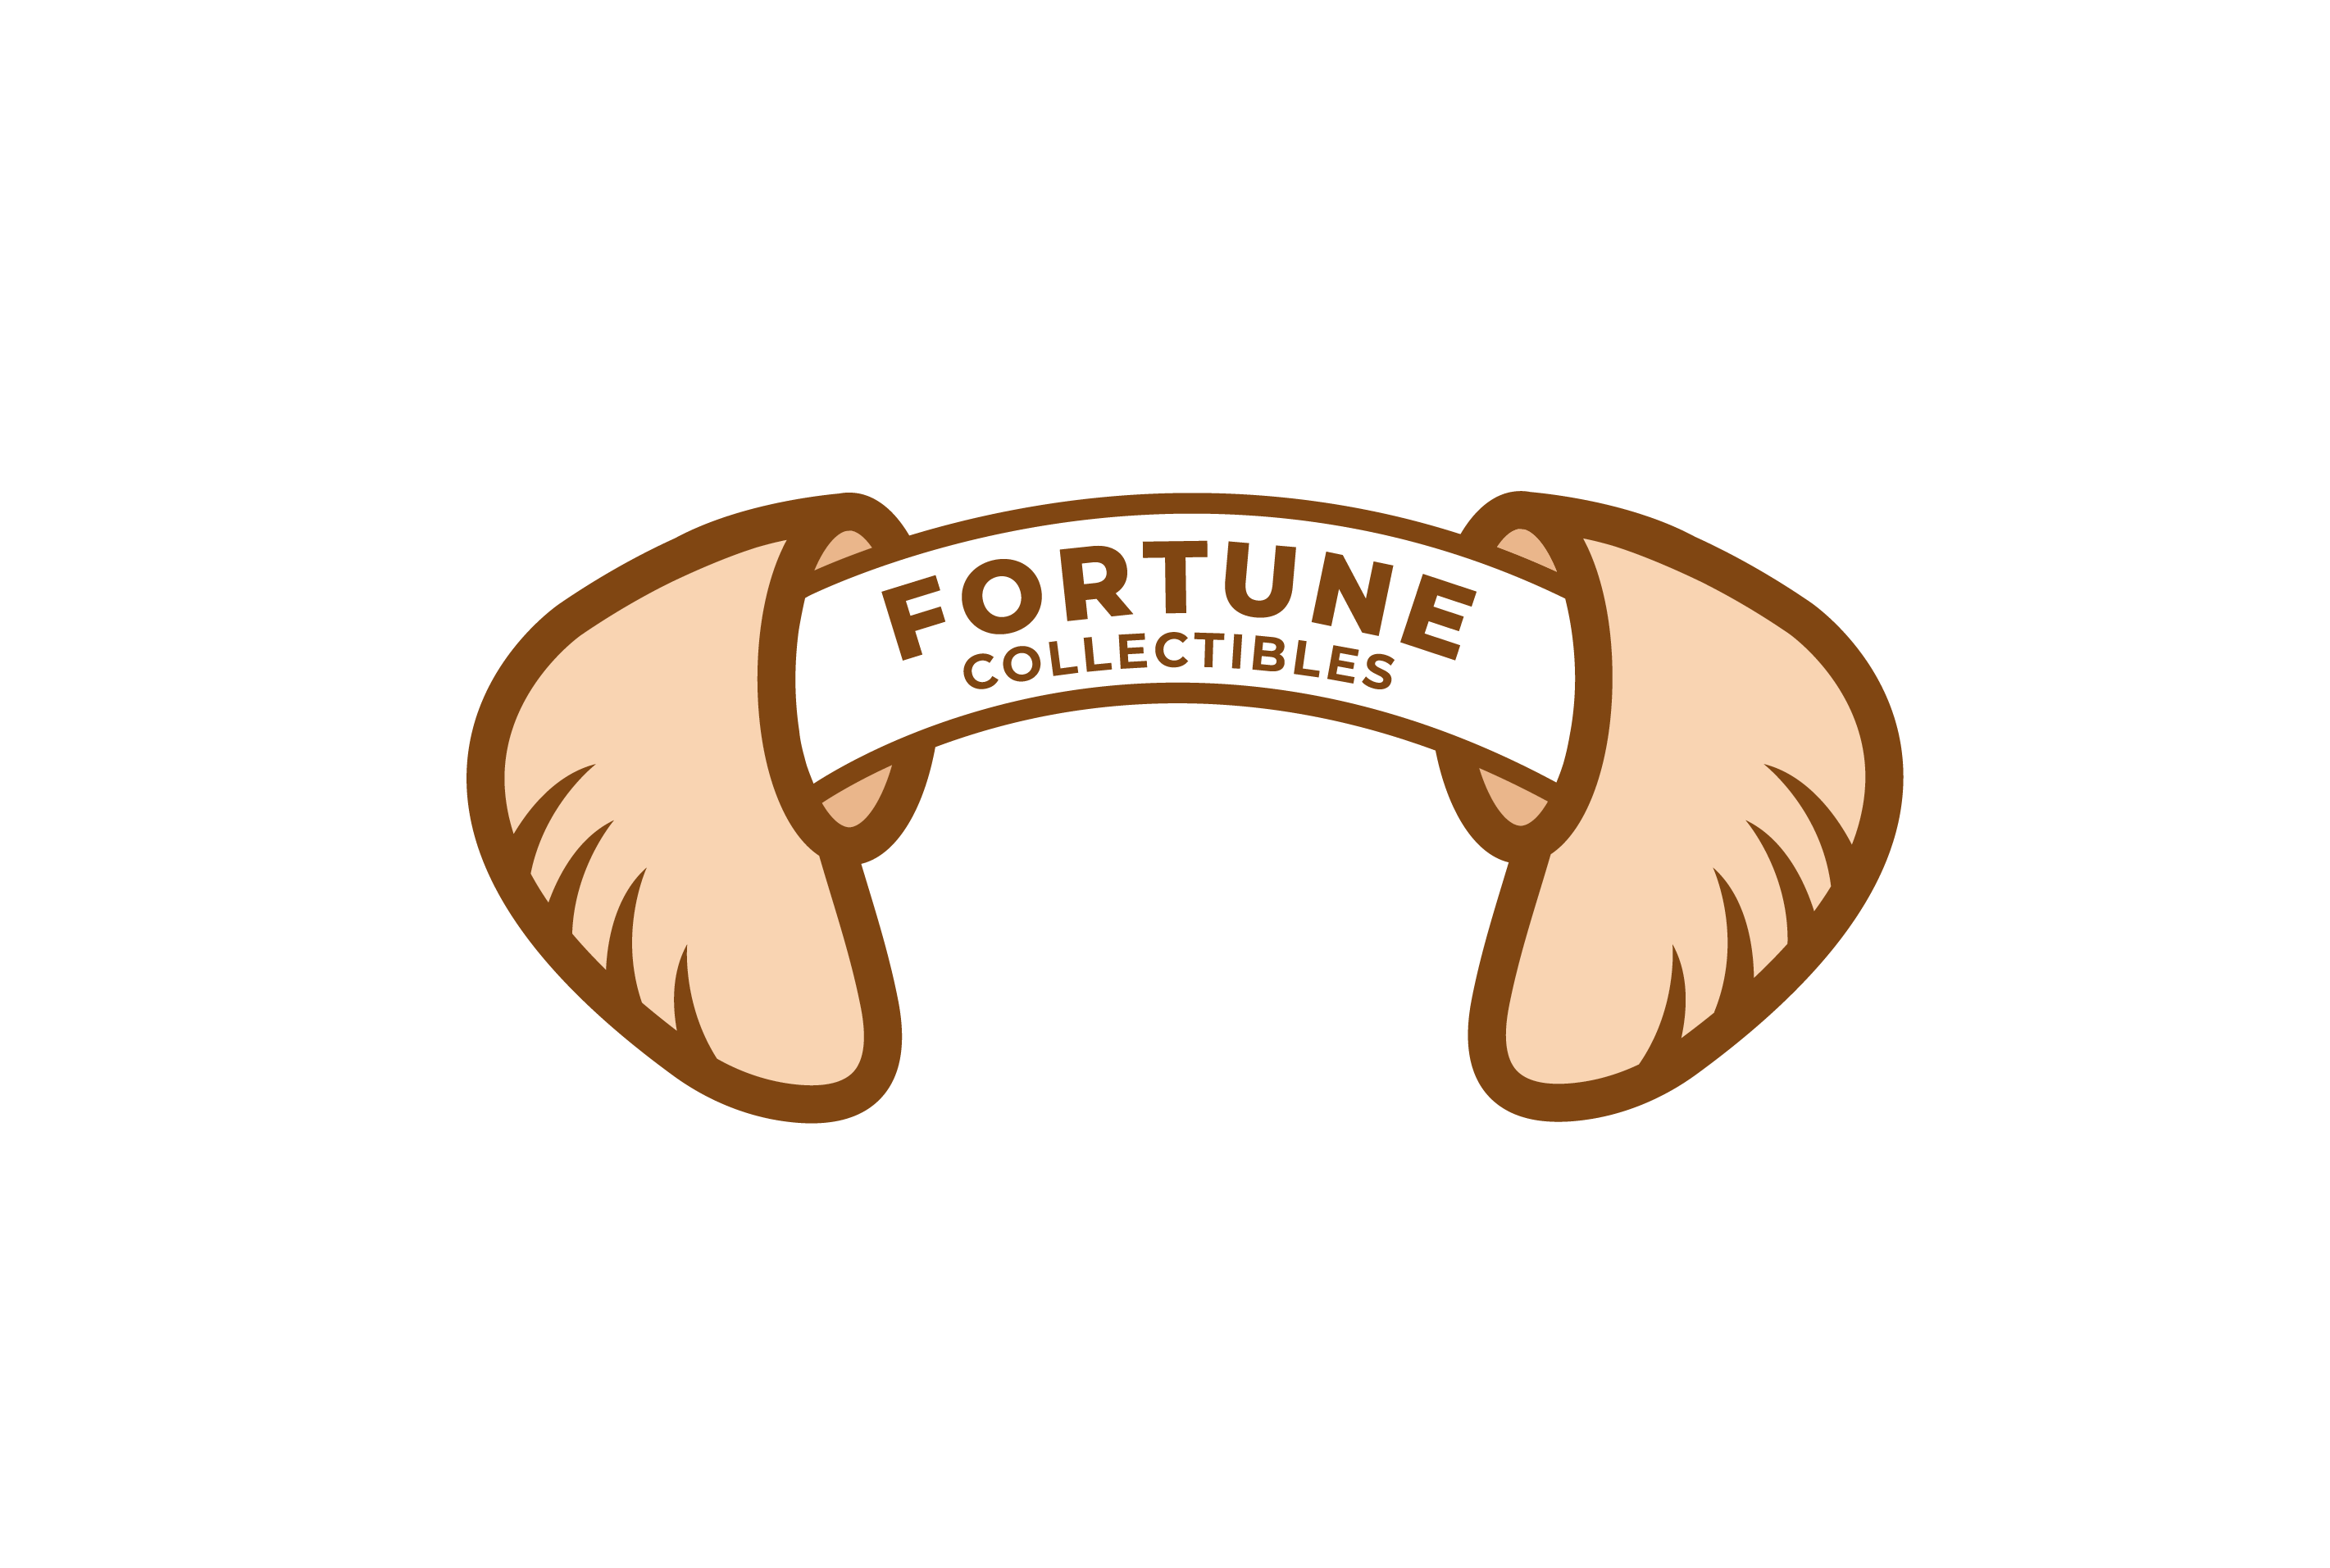 Fortune Collectibles